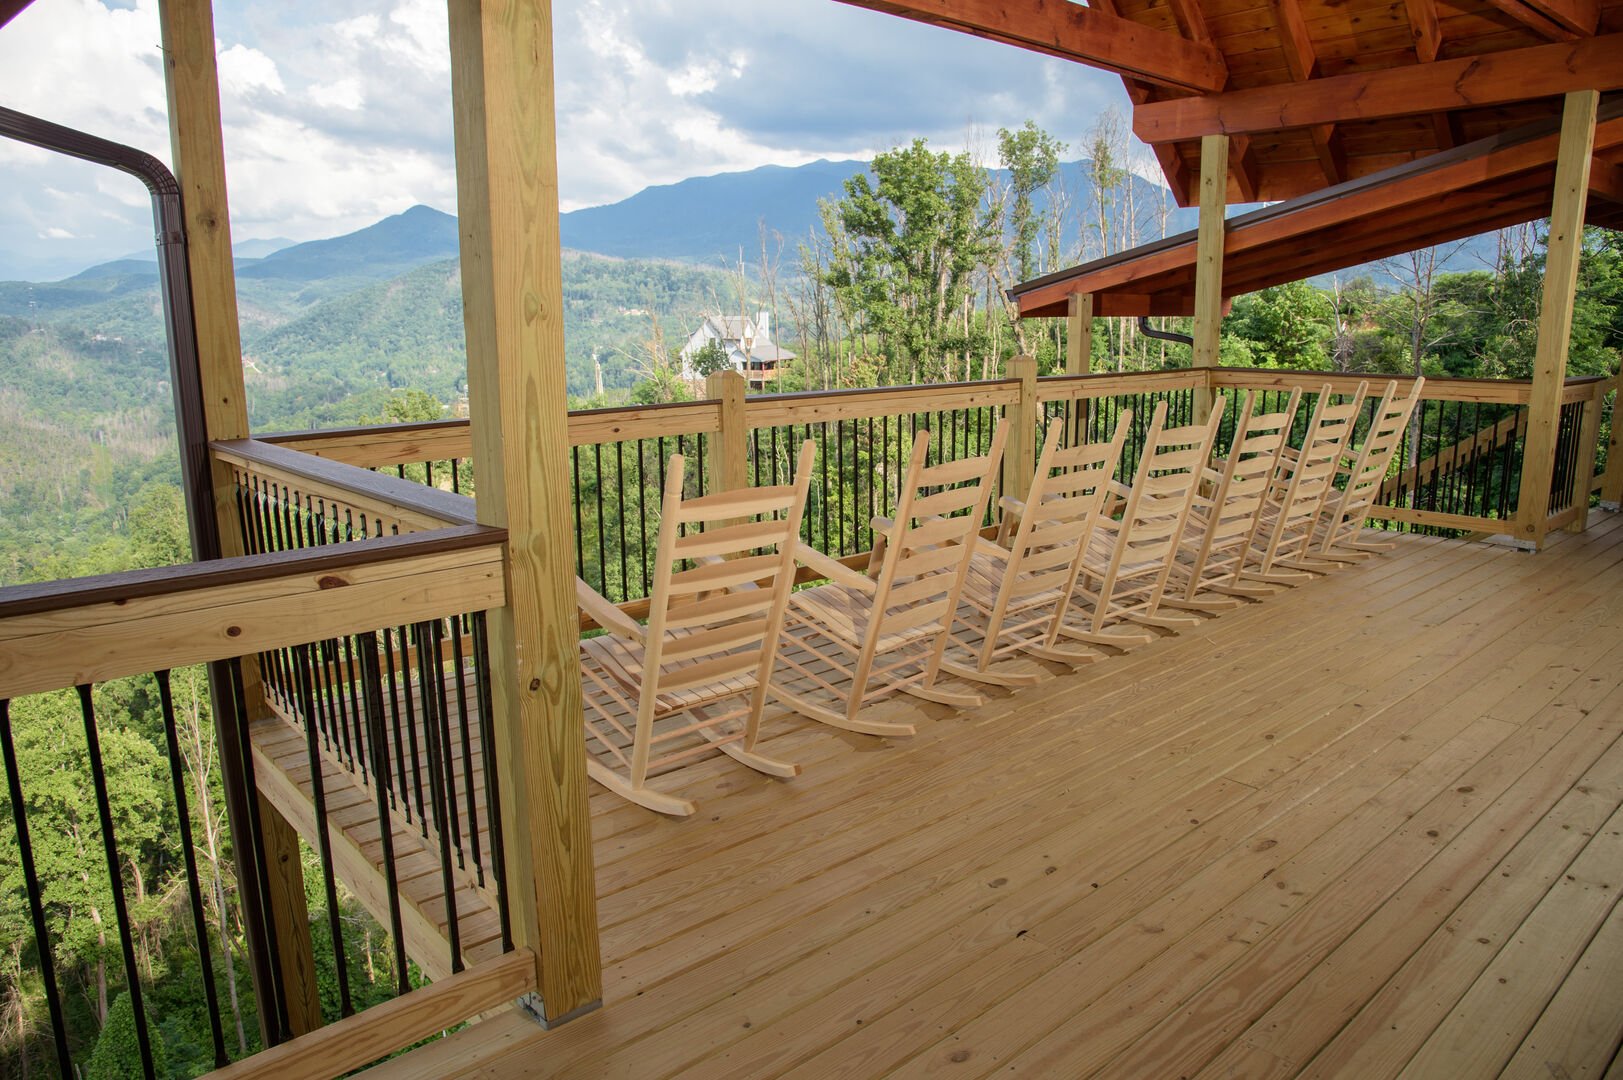 Relax with friends & loved ones while taking in the majestic Gatlinburg views